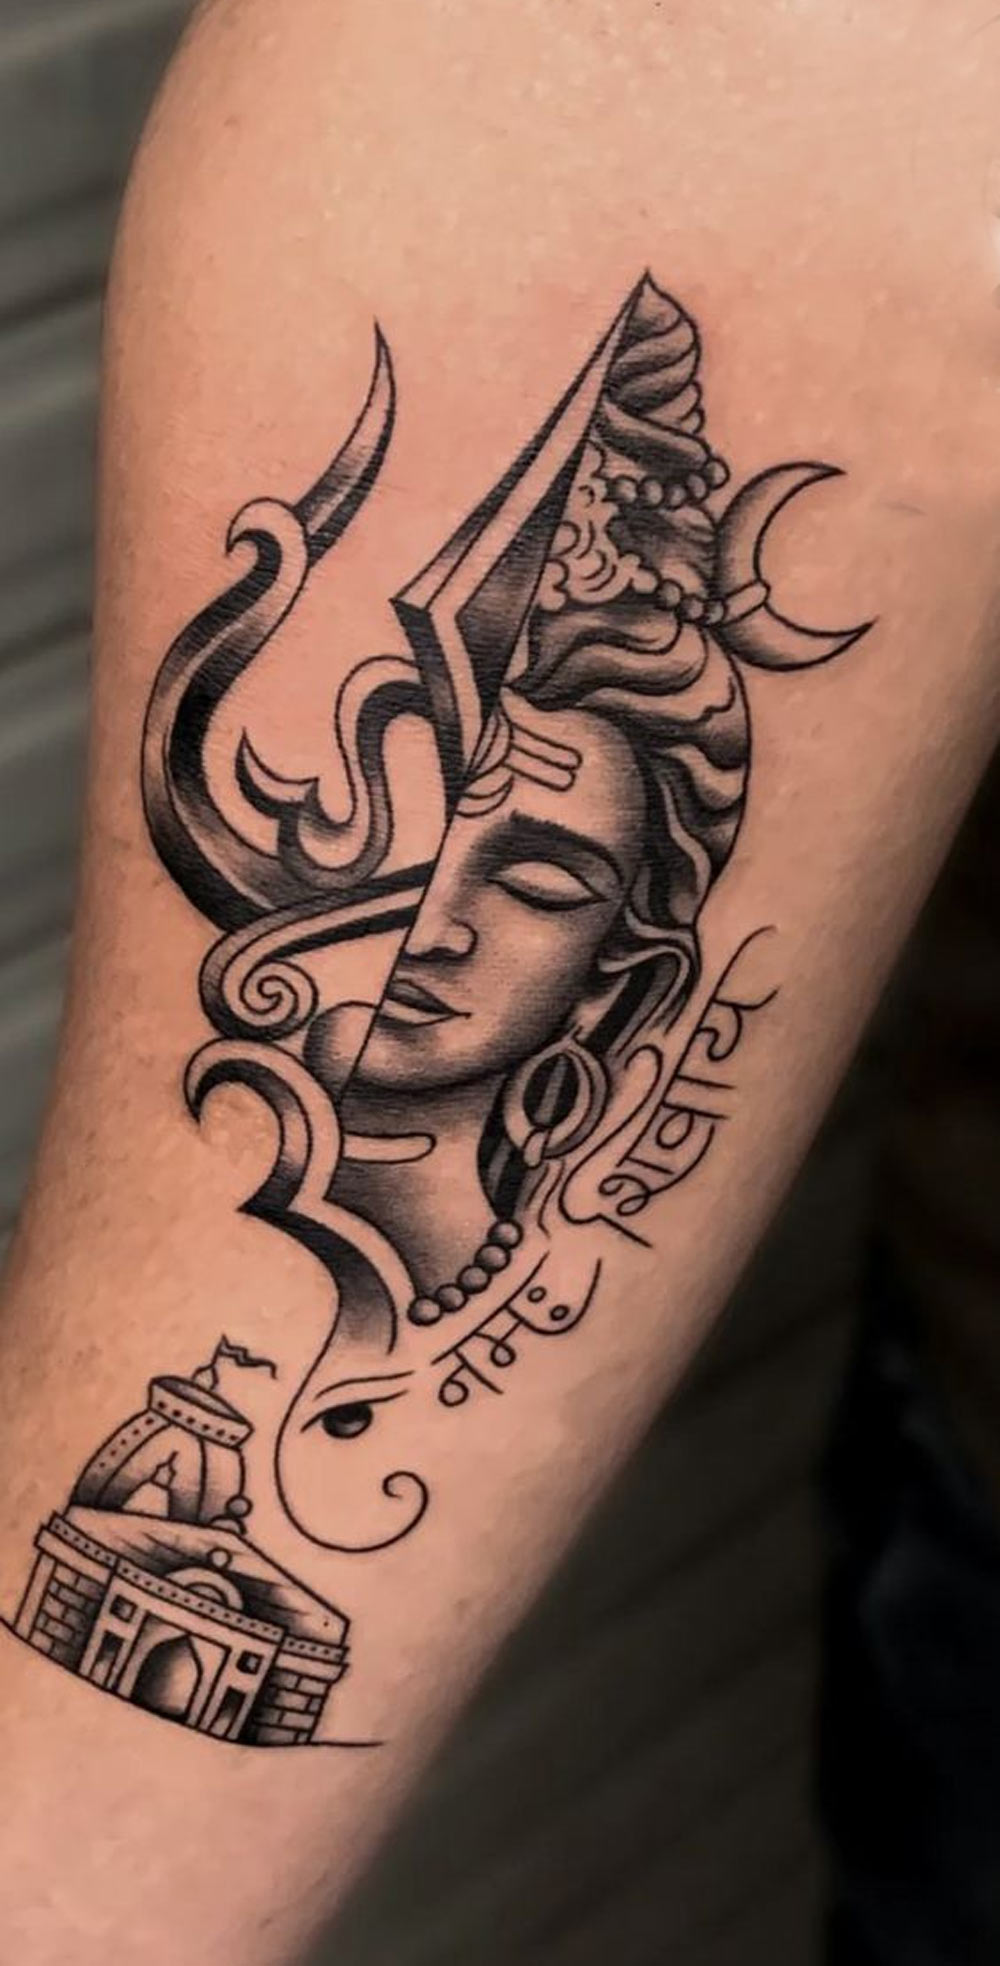 First tattoo - Lord Shiva, The Destroyer. Third time in India. This trip  has been transformative, healing and enlightening. Got a memory for life :D  : r/tattoo